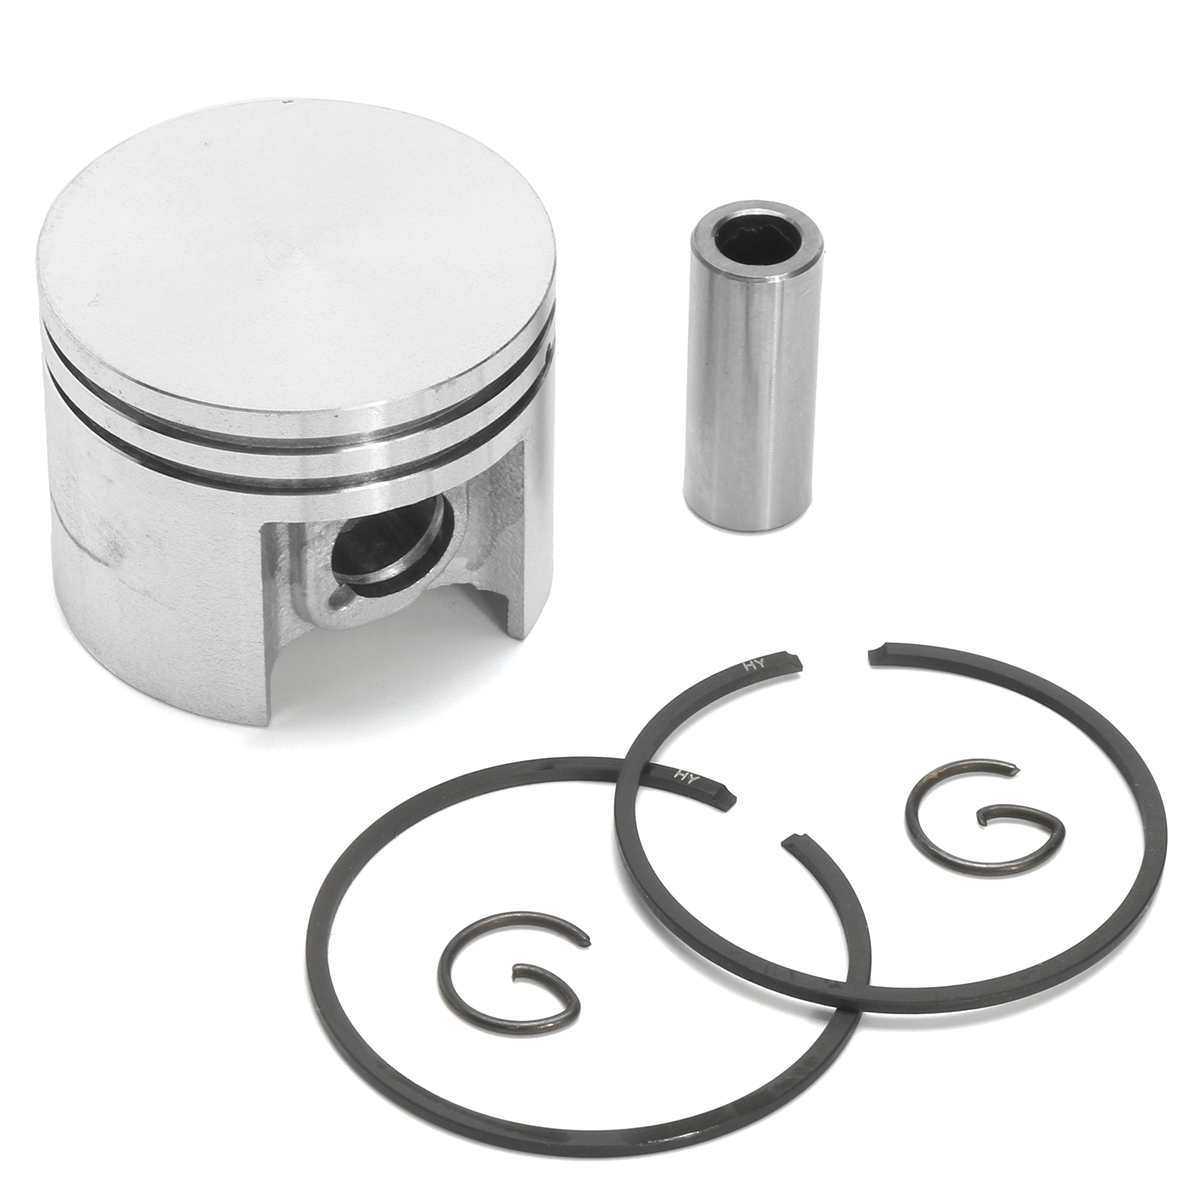 Black 38Mm Cylinder Piston & Ring Engine Kit for Stihl 018 MS180 MS 180 Chainsaw Parts